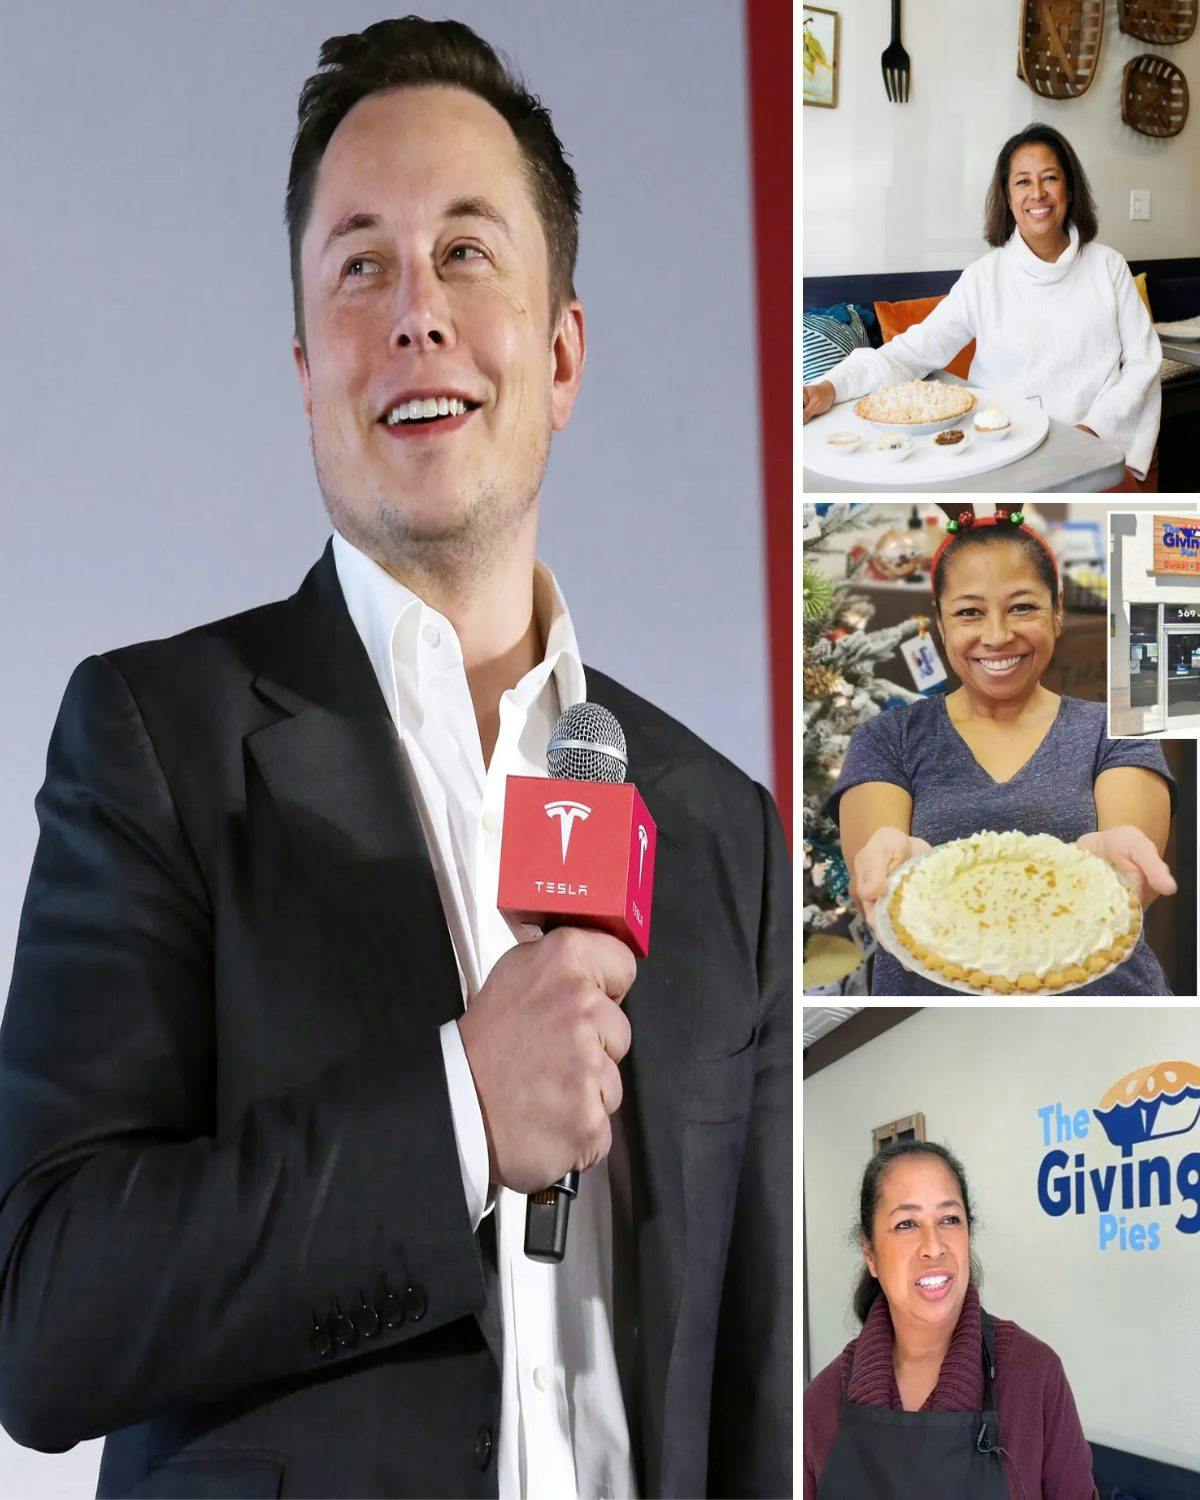 Cover Image for San Jose pie shop receives $2K after Billionaire Elon Musk’s promise to ‘make things good’ over Tesla’s canceled order